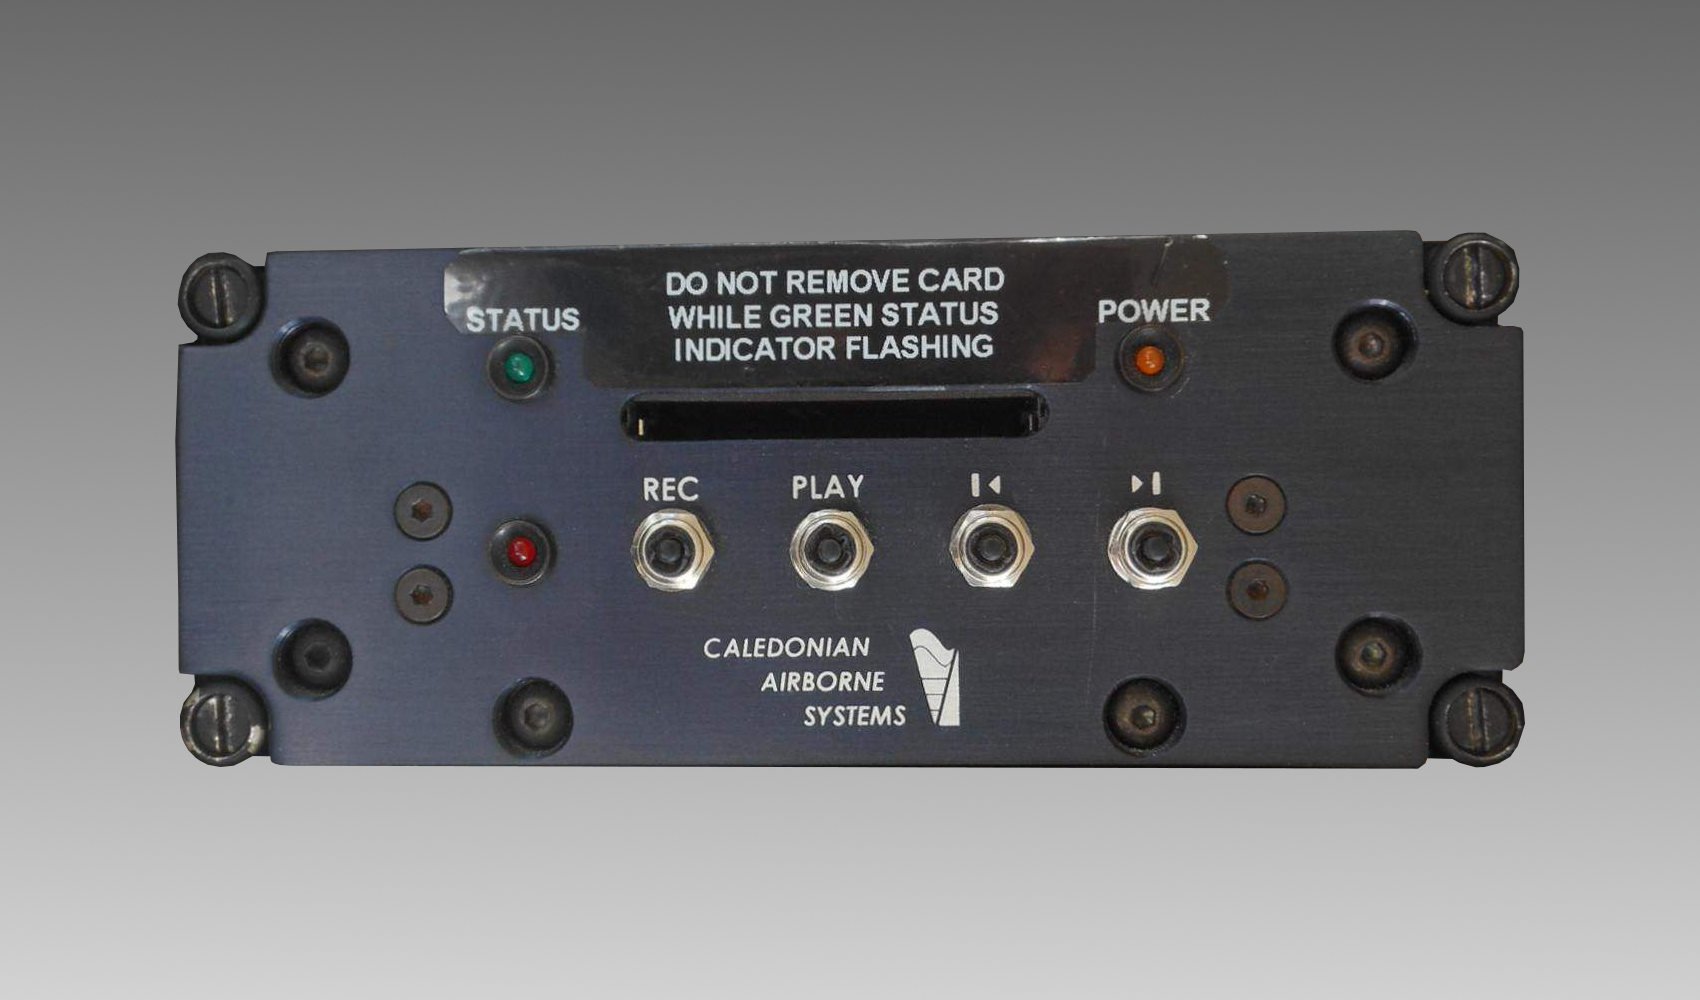 A control panel for the digital video recorder.